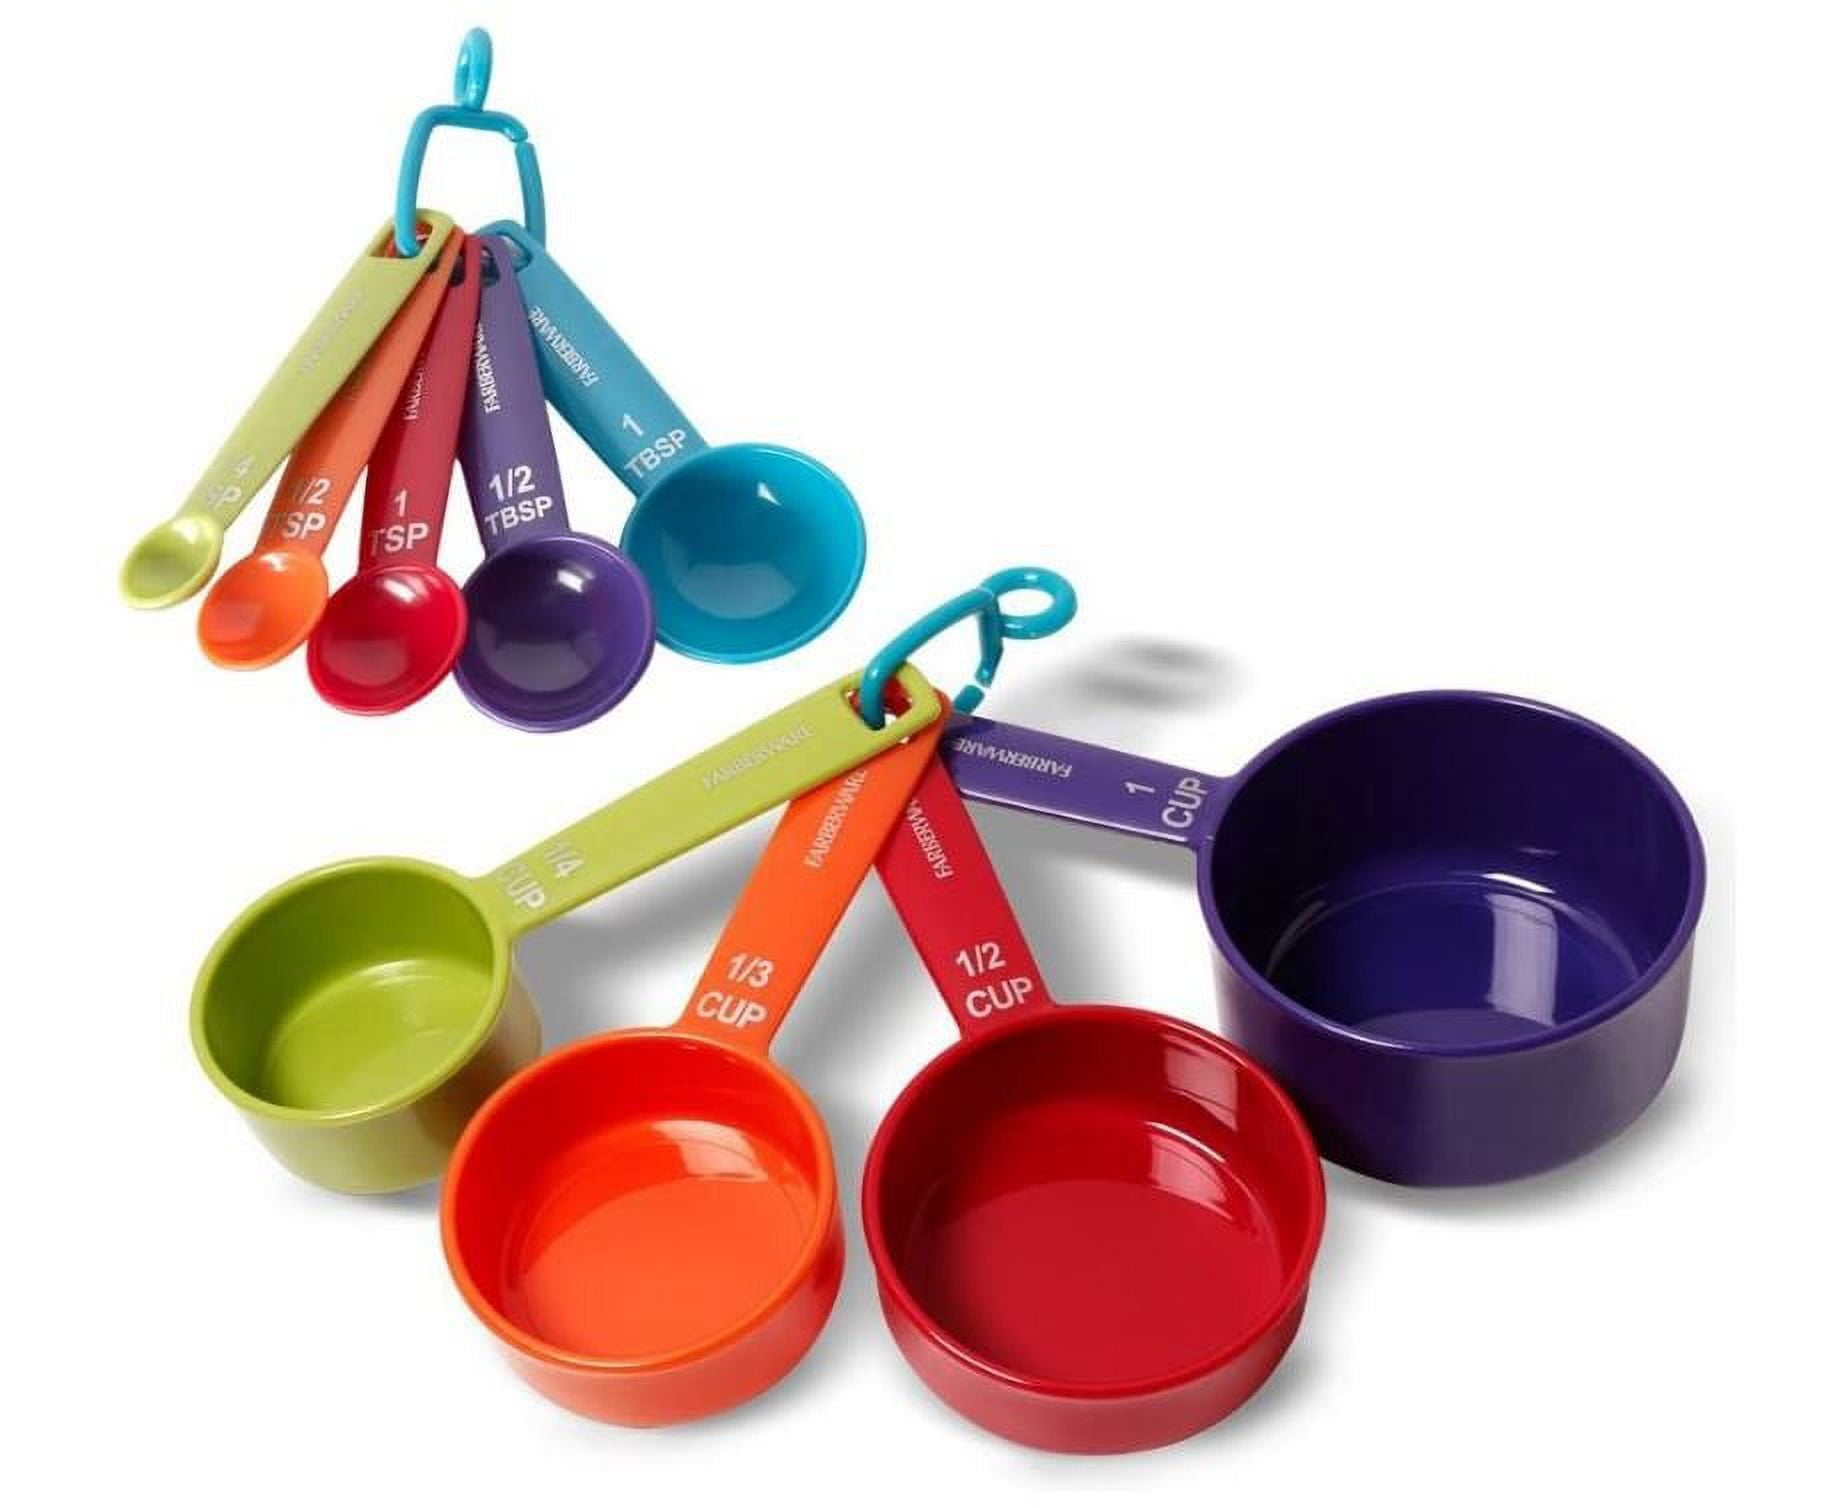 Colorful 5pc Plastic Measuring Spoon Set For Baking Kitchen Use